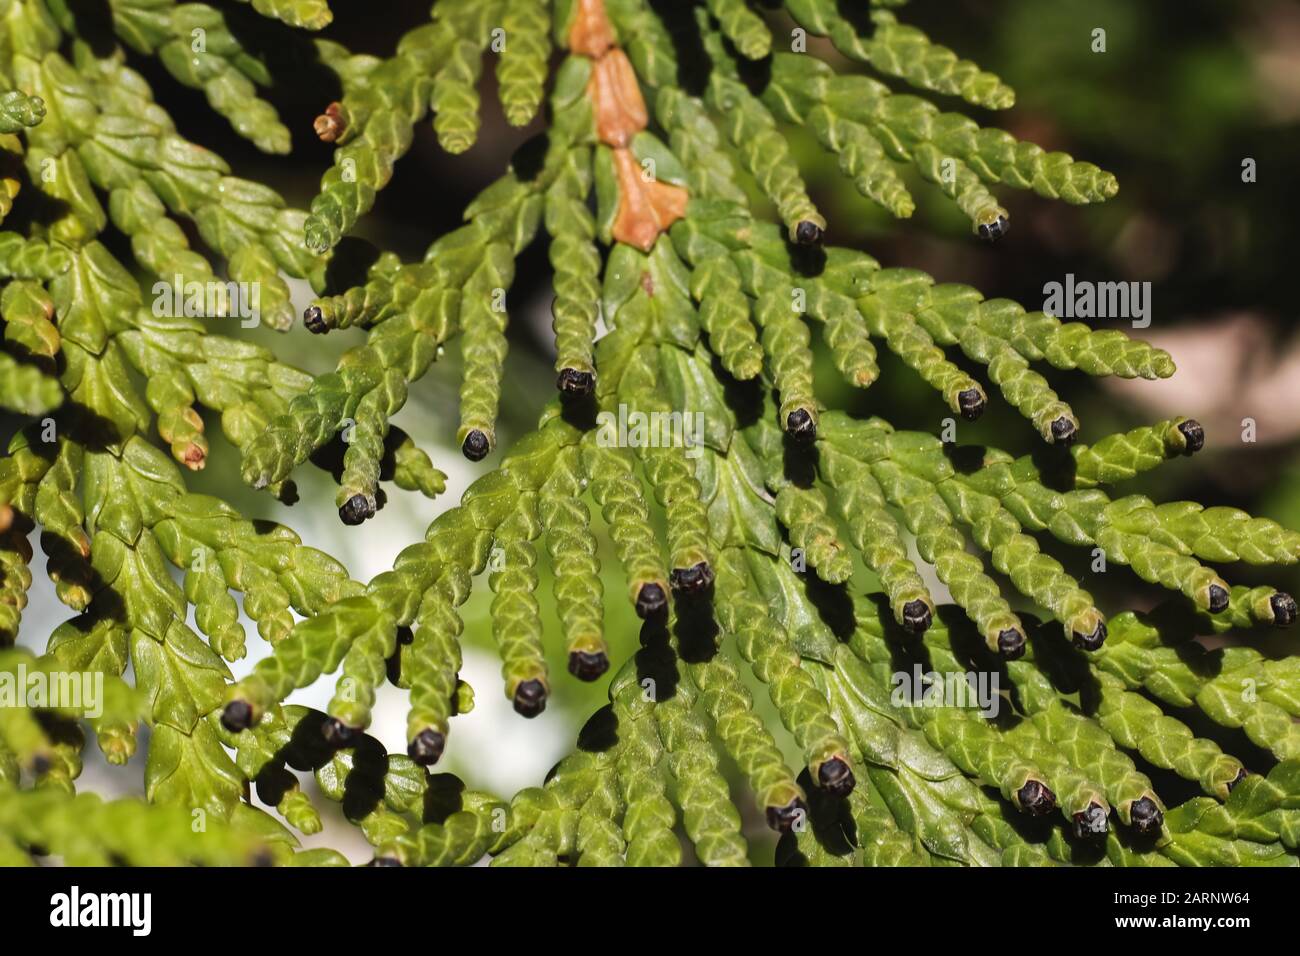 The Green thuja tree branches close up Stock Photo